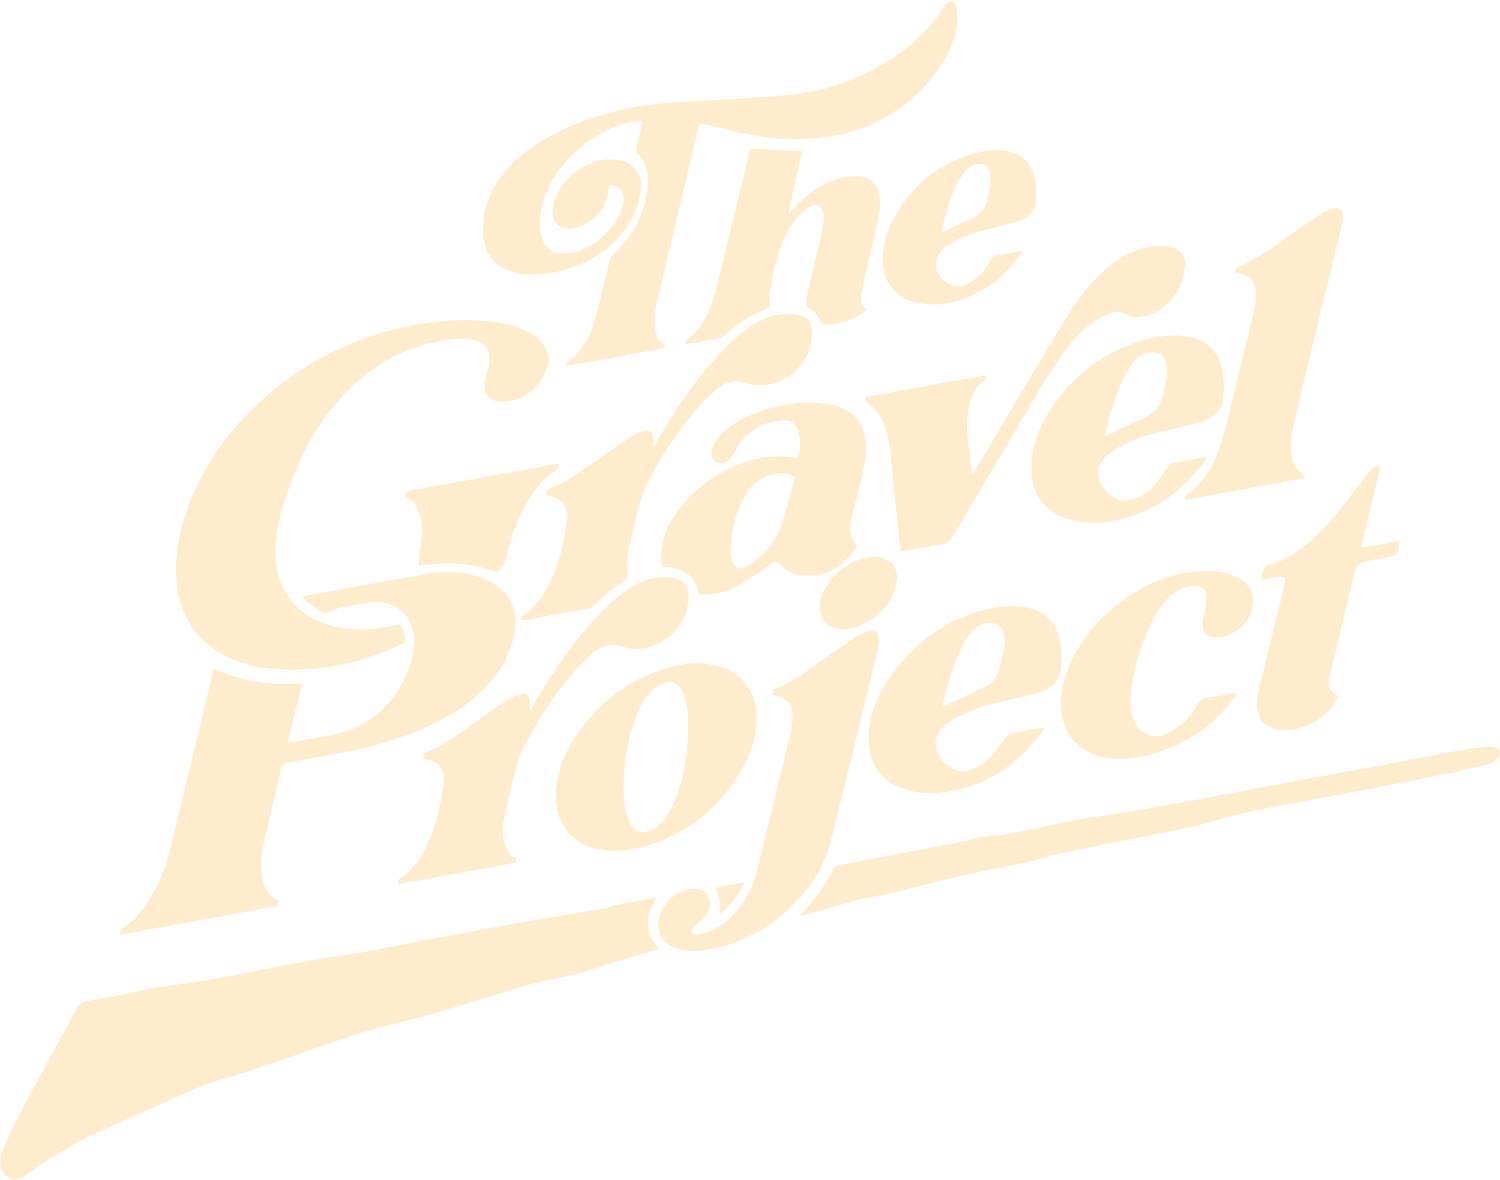 The Gravel Project